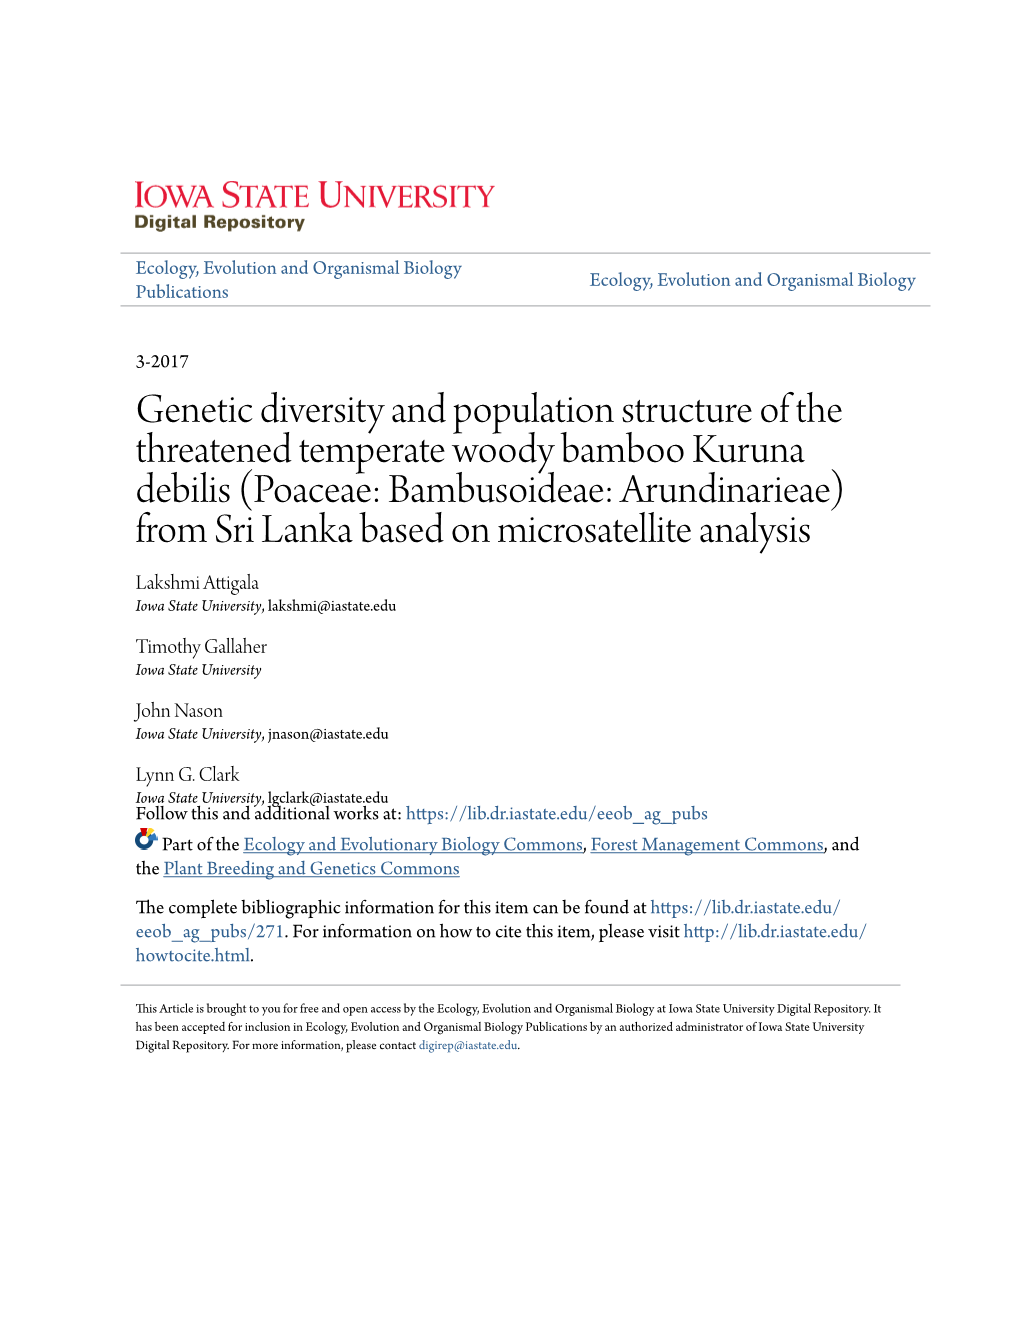 Genetic Diversity and Population Structure of the Threatened